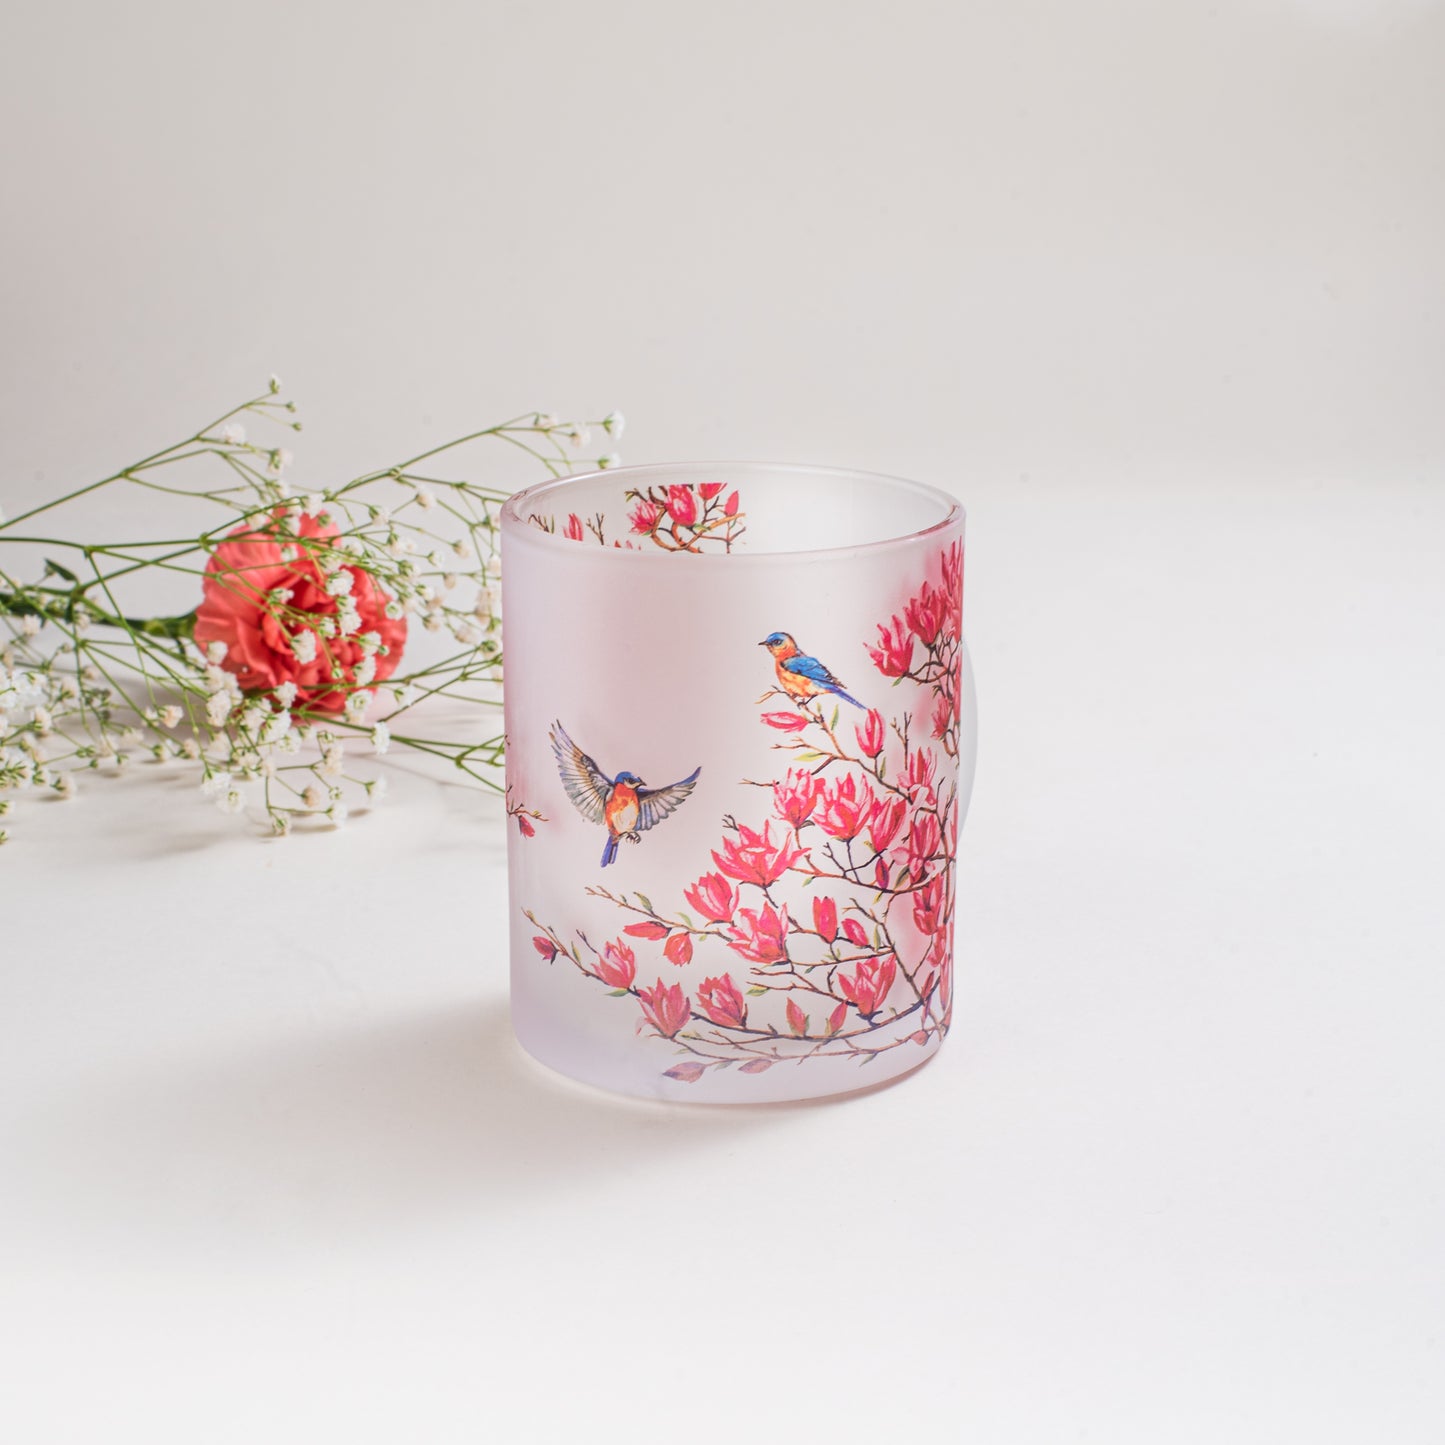 Pink Magnolias Frosted Glass Mug